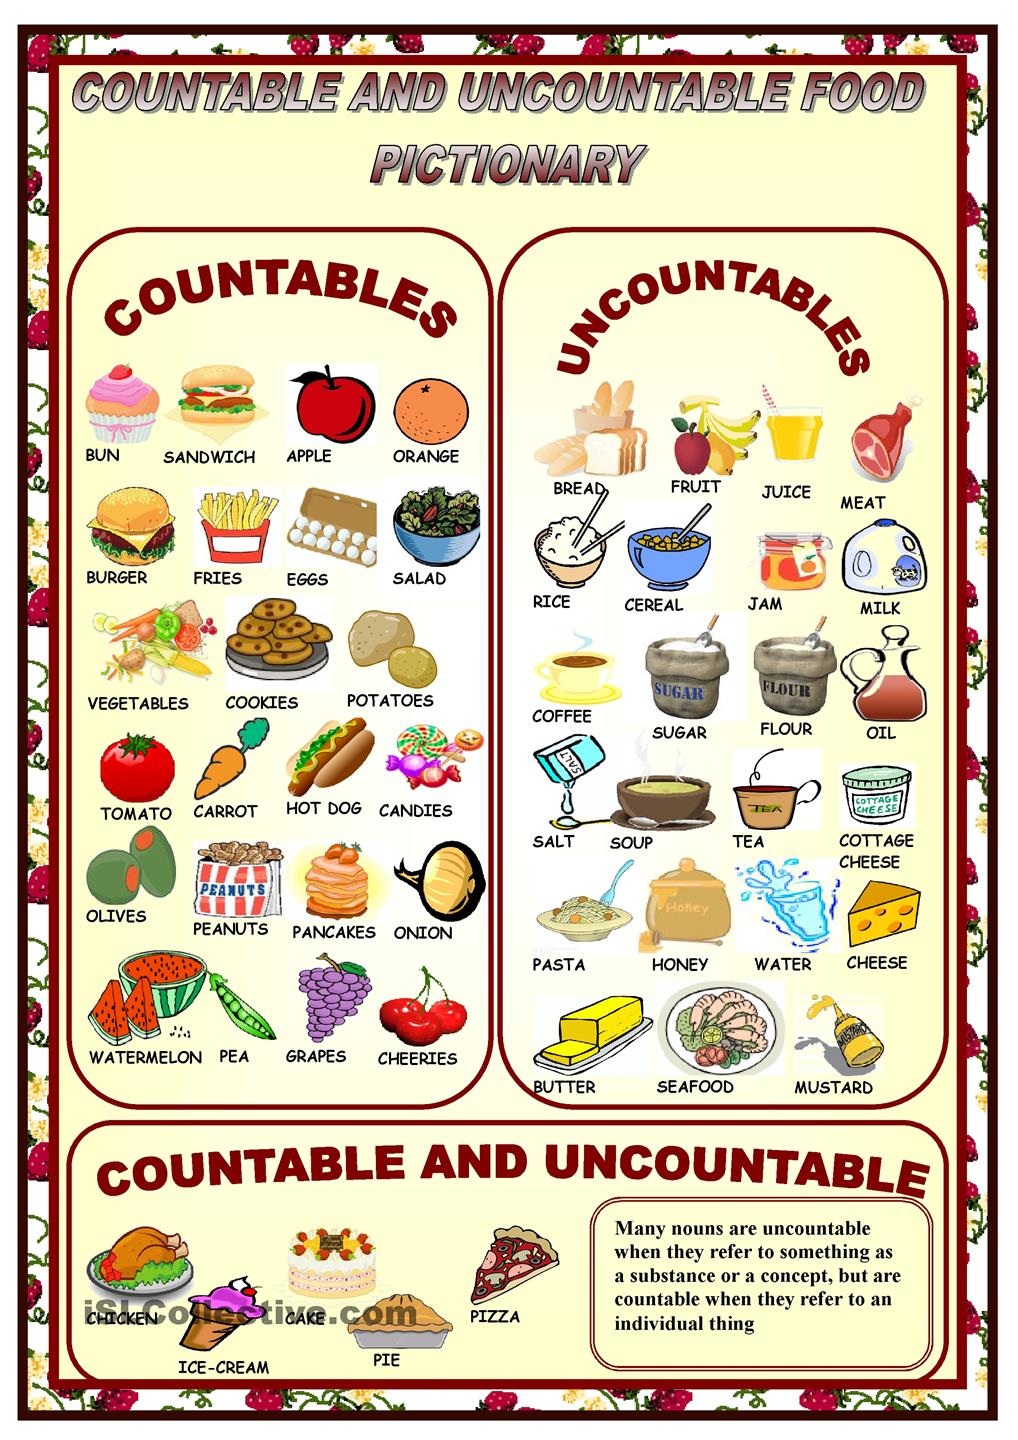 4th grade. Countable and uncountable nouns.